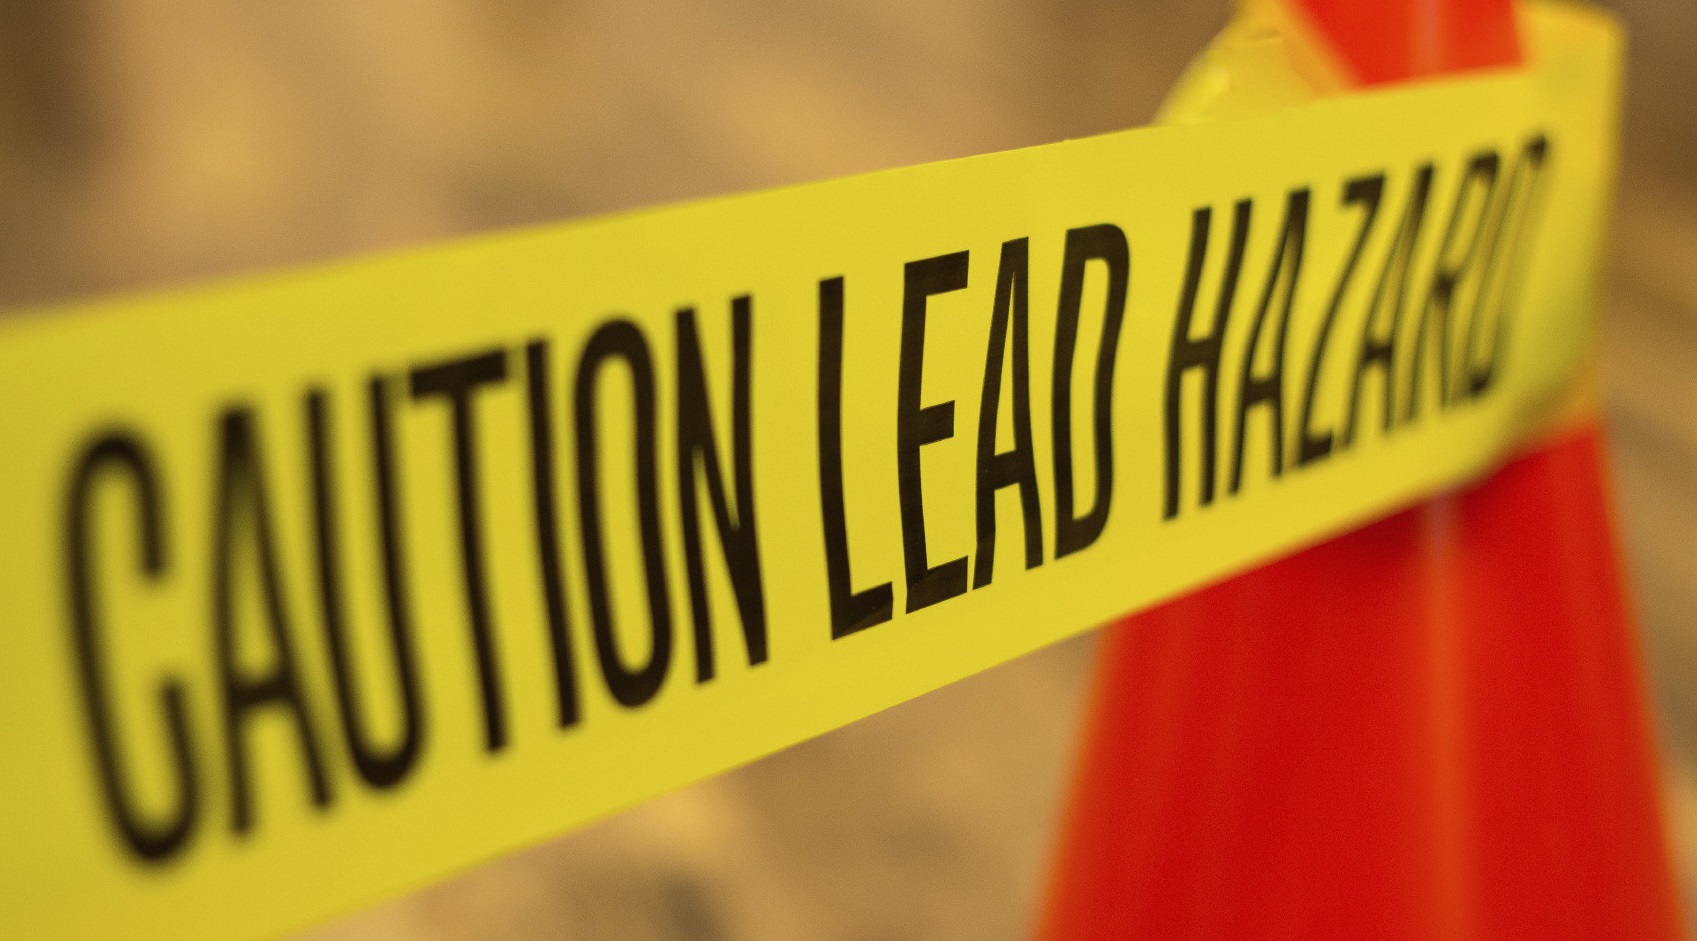 Yellow hazard tape attached to an orange cone that reads "Caution lead hazard" in all caps.